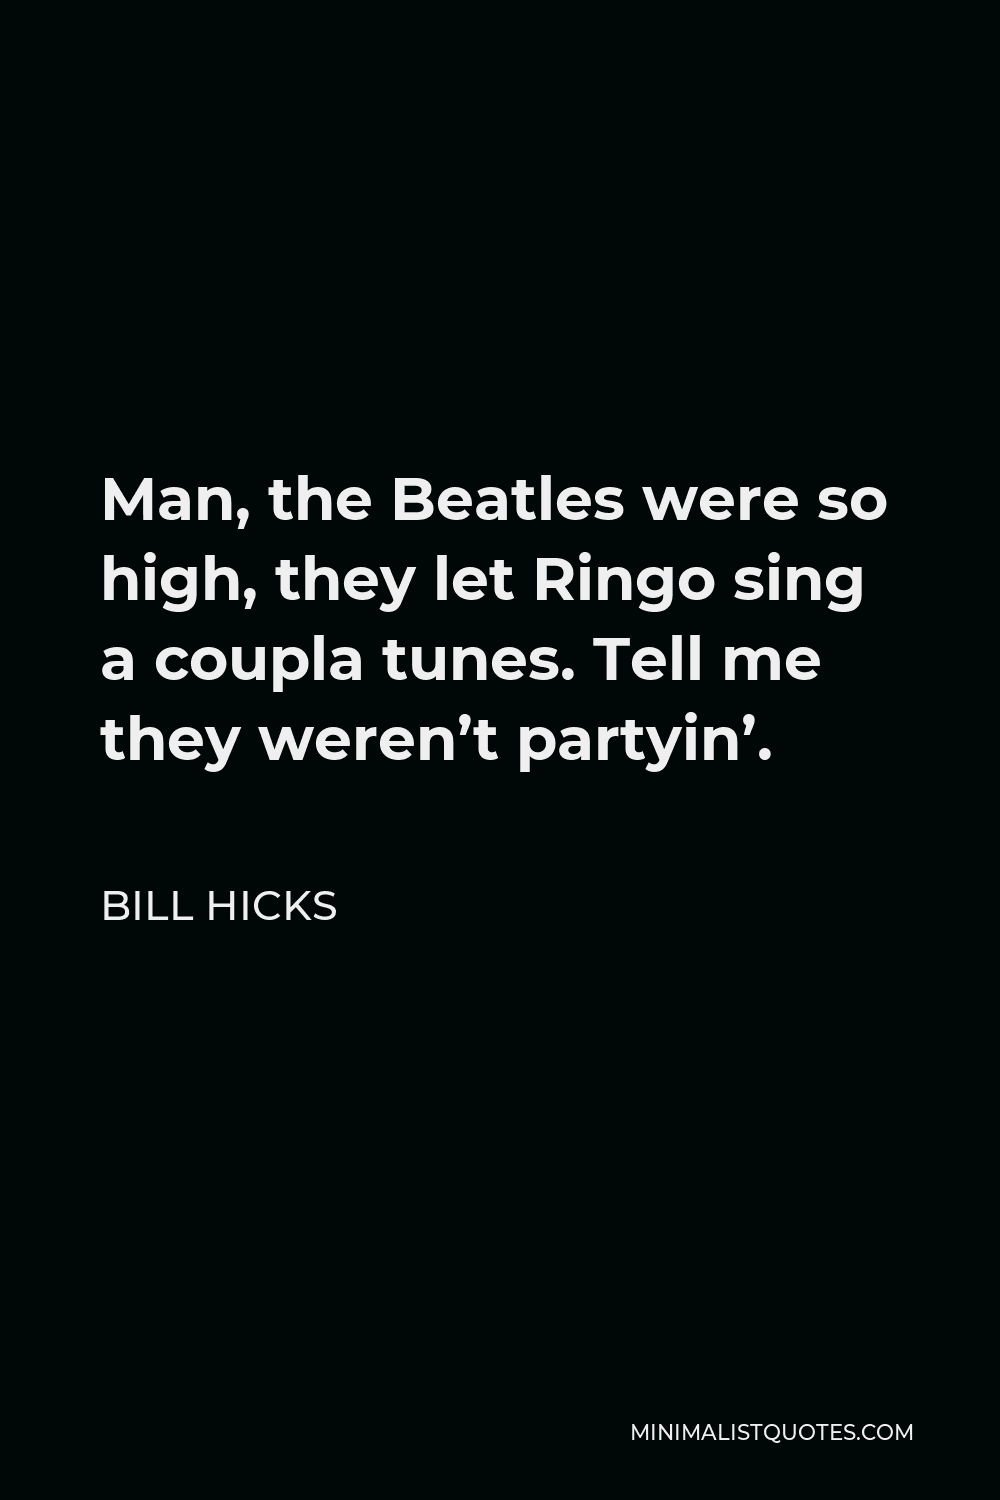 Bill Hicks Quote - Man, the Beatles were so high, they let Ringo sing a coupla tunes. Tell me they weren’t partyin’.